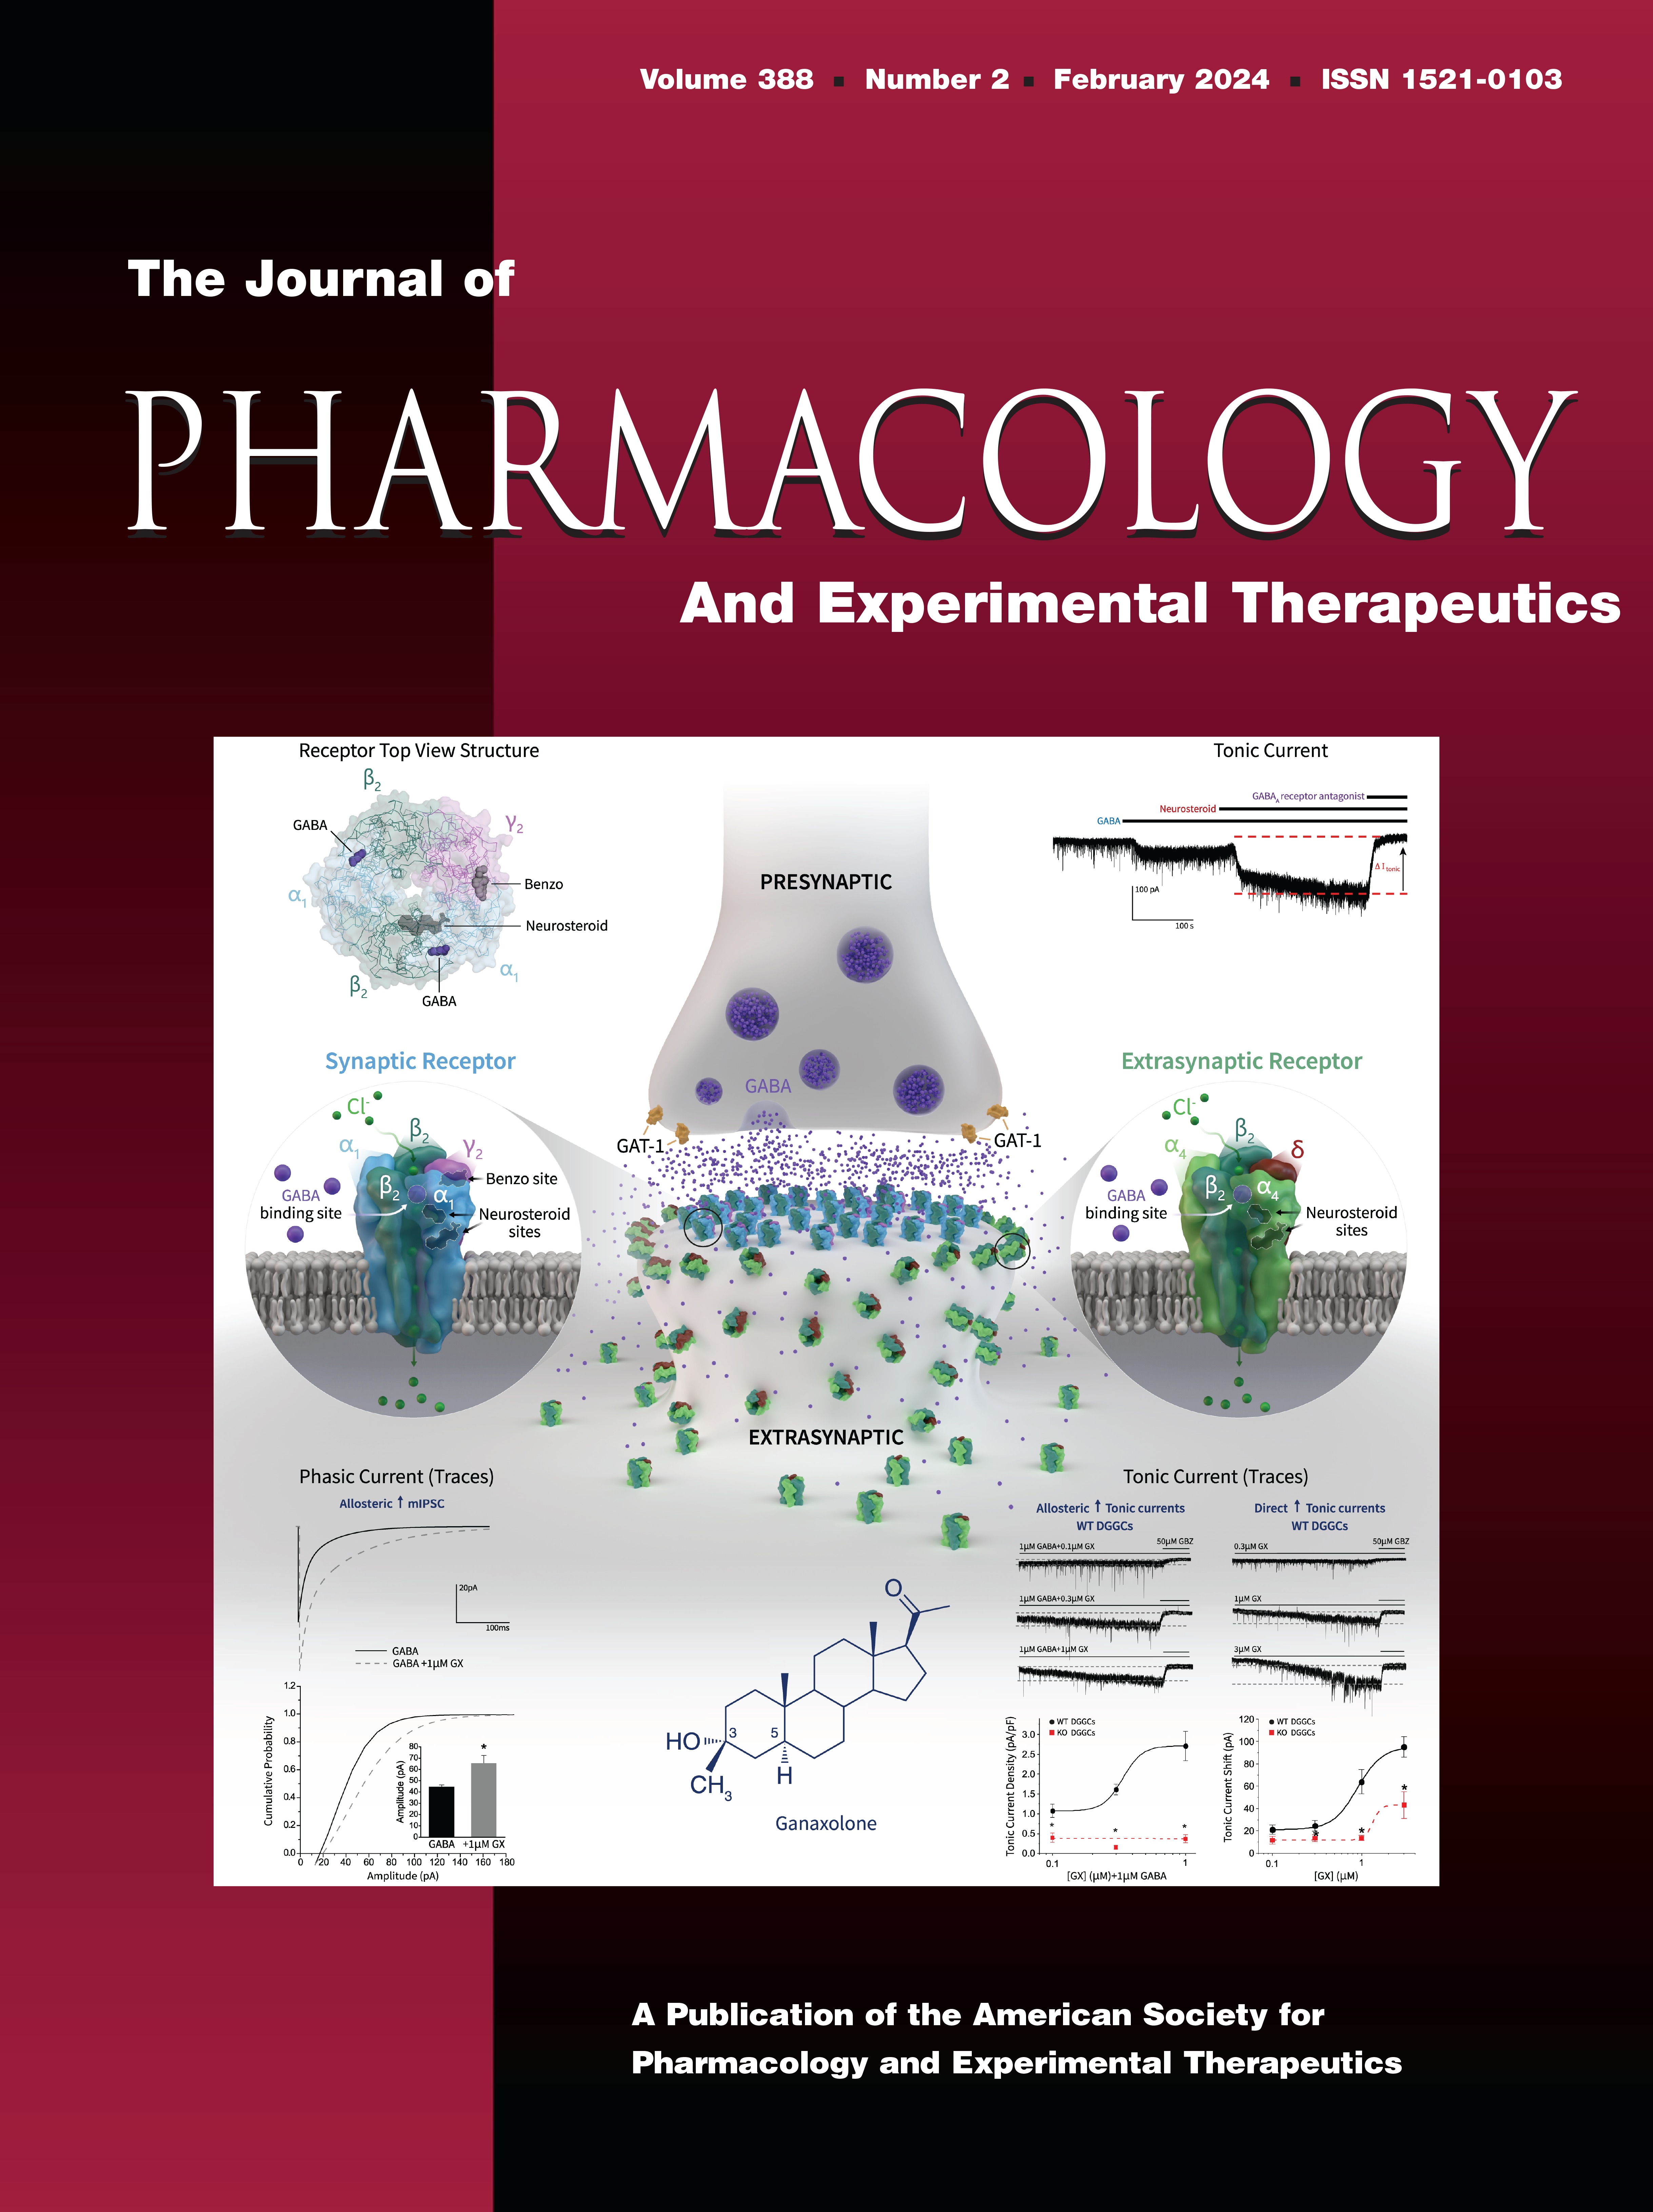 The {beta}-Blocker Carvedilol and Related Aryloxypropanolamines Promote ERK1/2 Phosphorylation in HEK293 Cells with KA Values Distinct From Their Equilibrium Dissociation Constants as {beta}2-Adrenoceptor Antagonists: Evidence for Functional Affinity [Cardiovascular]